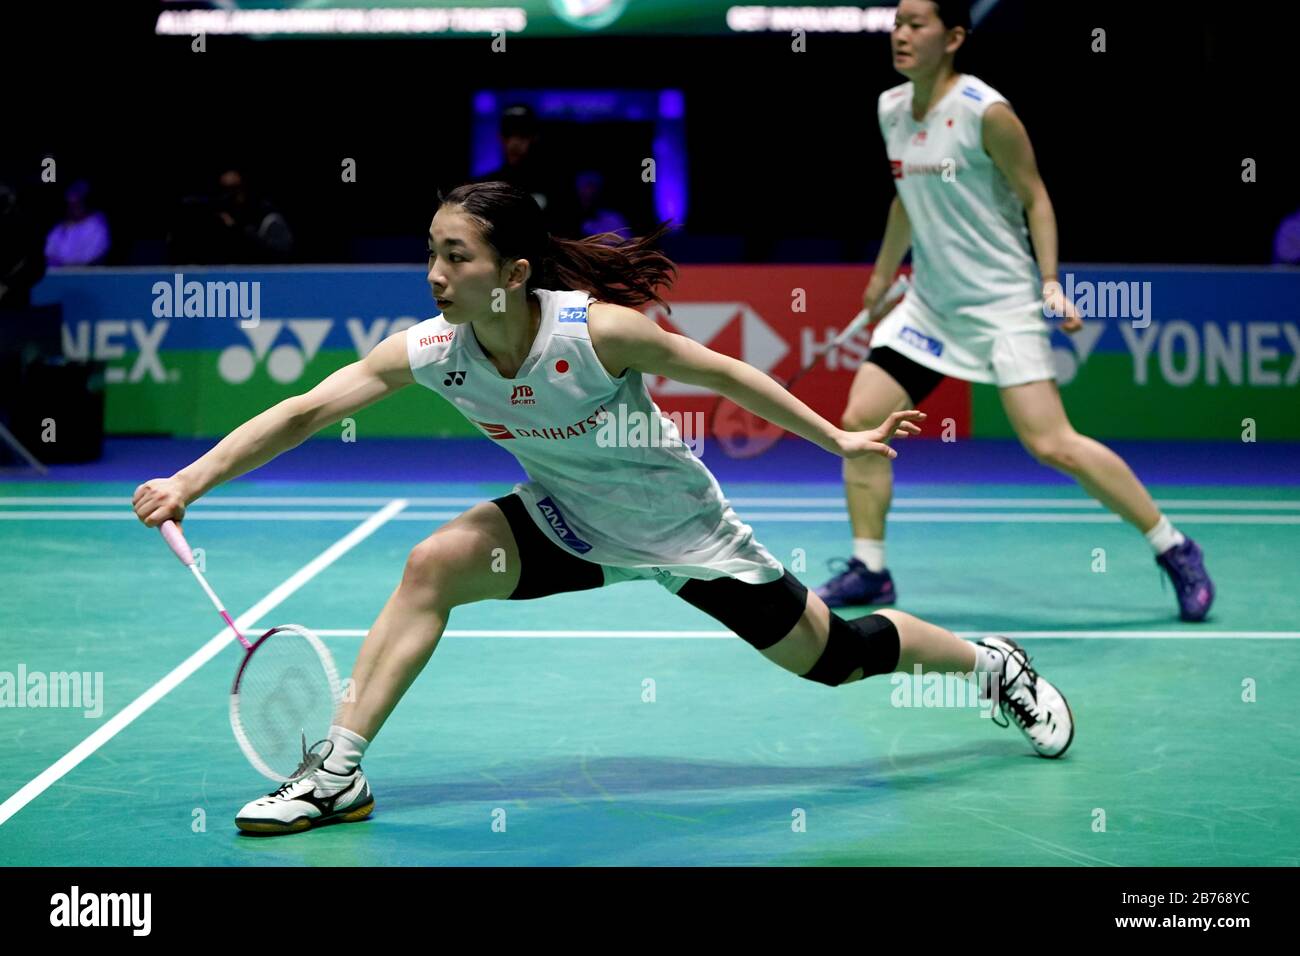 Japans Misaki Matsutomo (left) and Ayaka Takahashi in action in the Womens doubles match during the YONEX All England Open Badminton Championships at Arena Birmingham Stock Photo